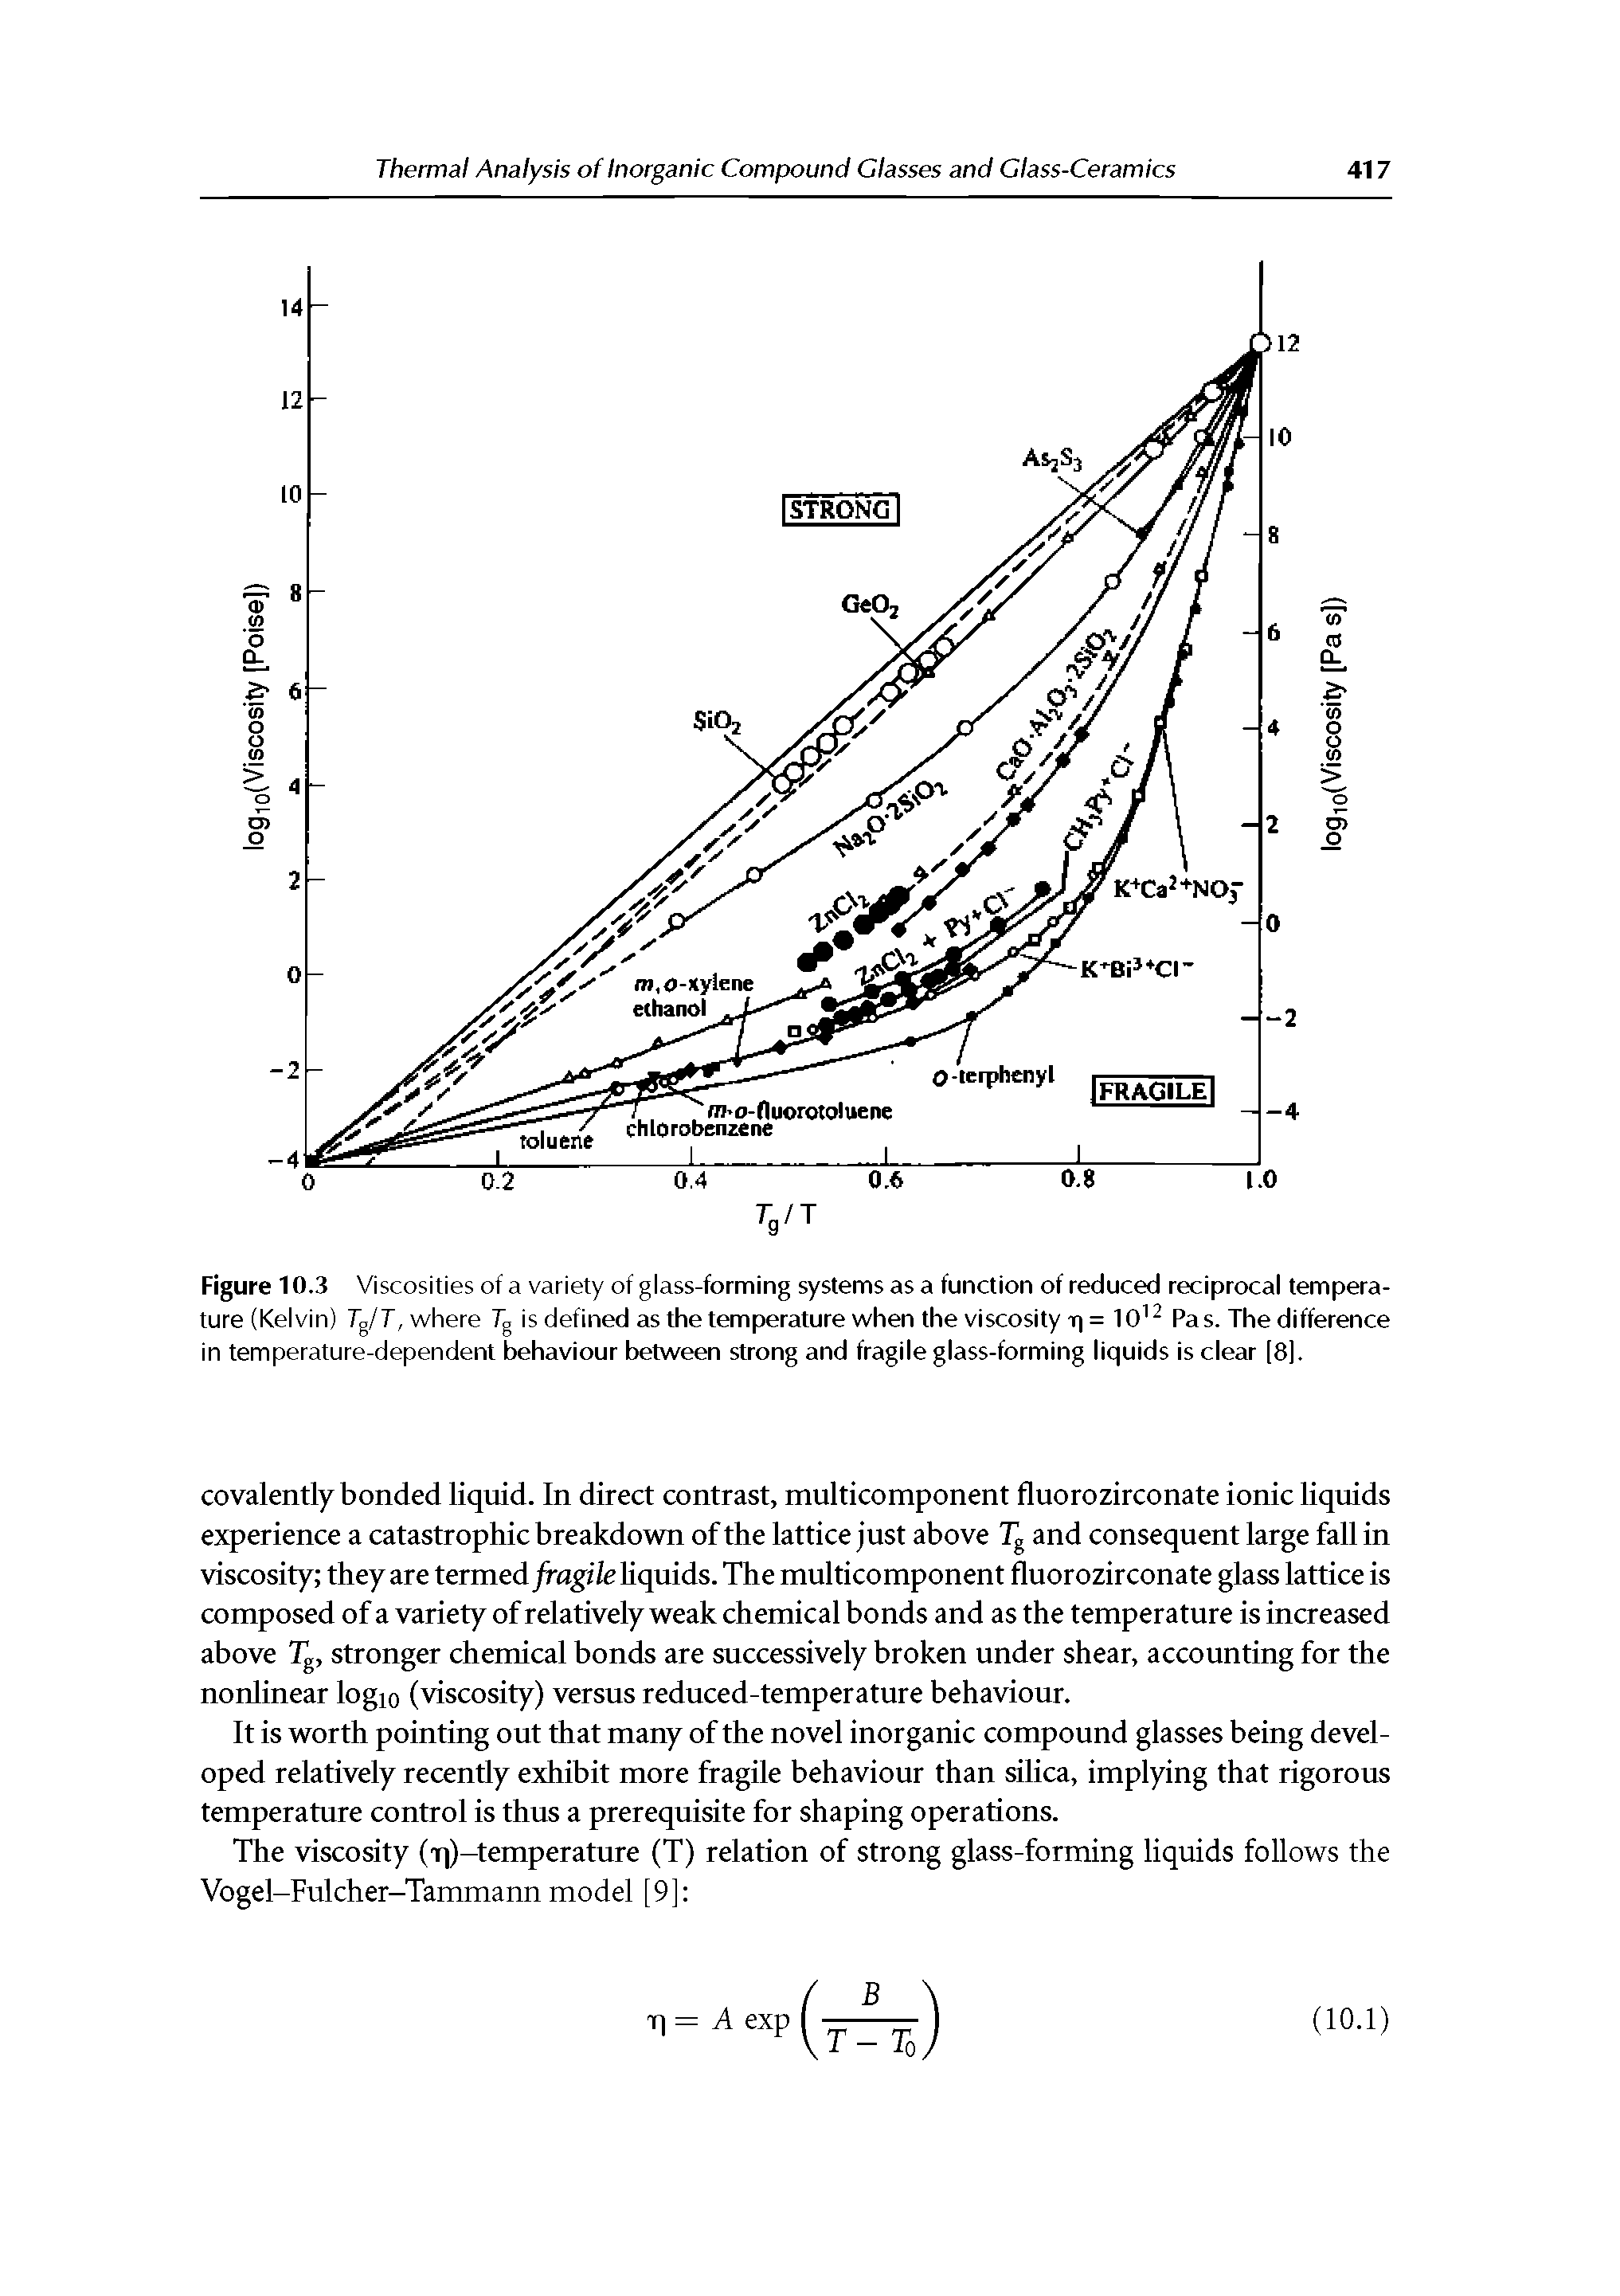 Figure 10.3 Viscosities of a variety of glass-forming systems as a function of reduced reciprocal temperature (Kelvin) Tg/r, where 7g is defined as the temperature when the viscosity t = 10 Pas. The difference in temperature-dependent behaviour between strong and fragile glass-forming liquids is clear (8).